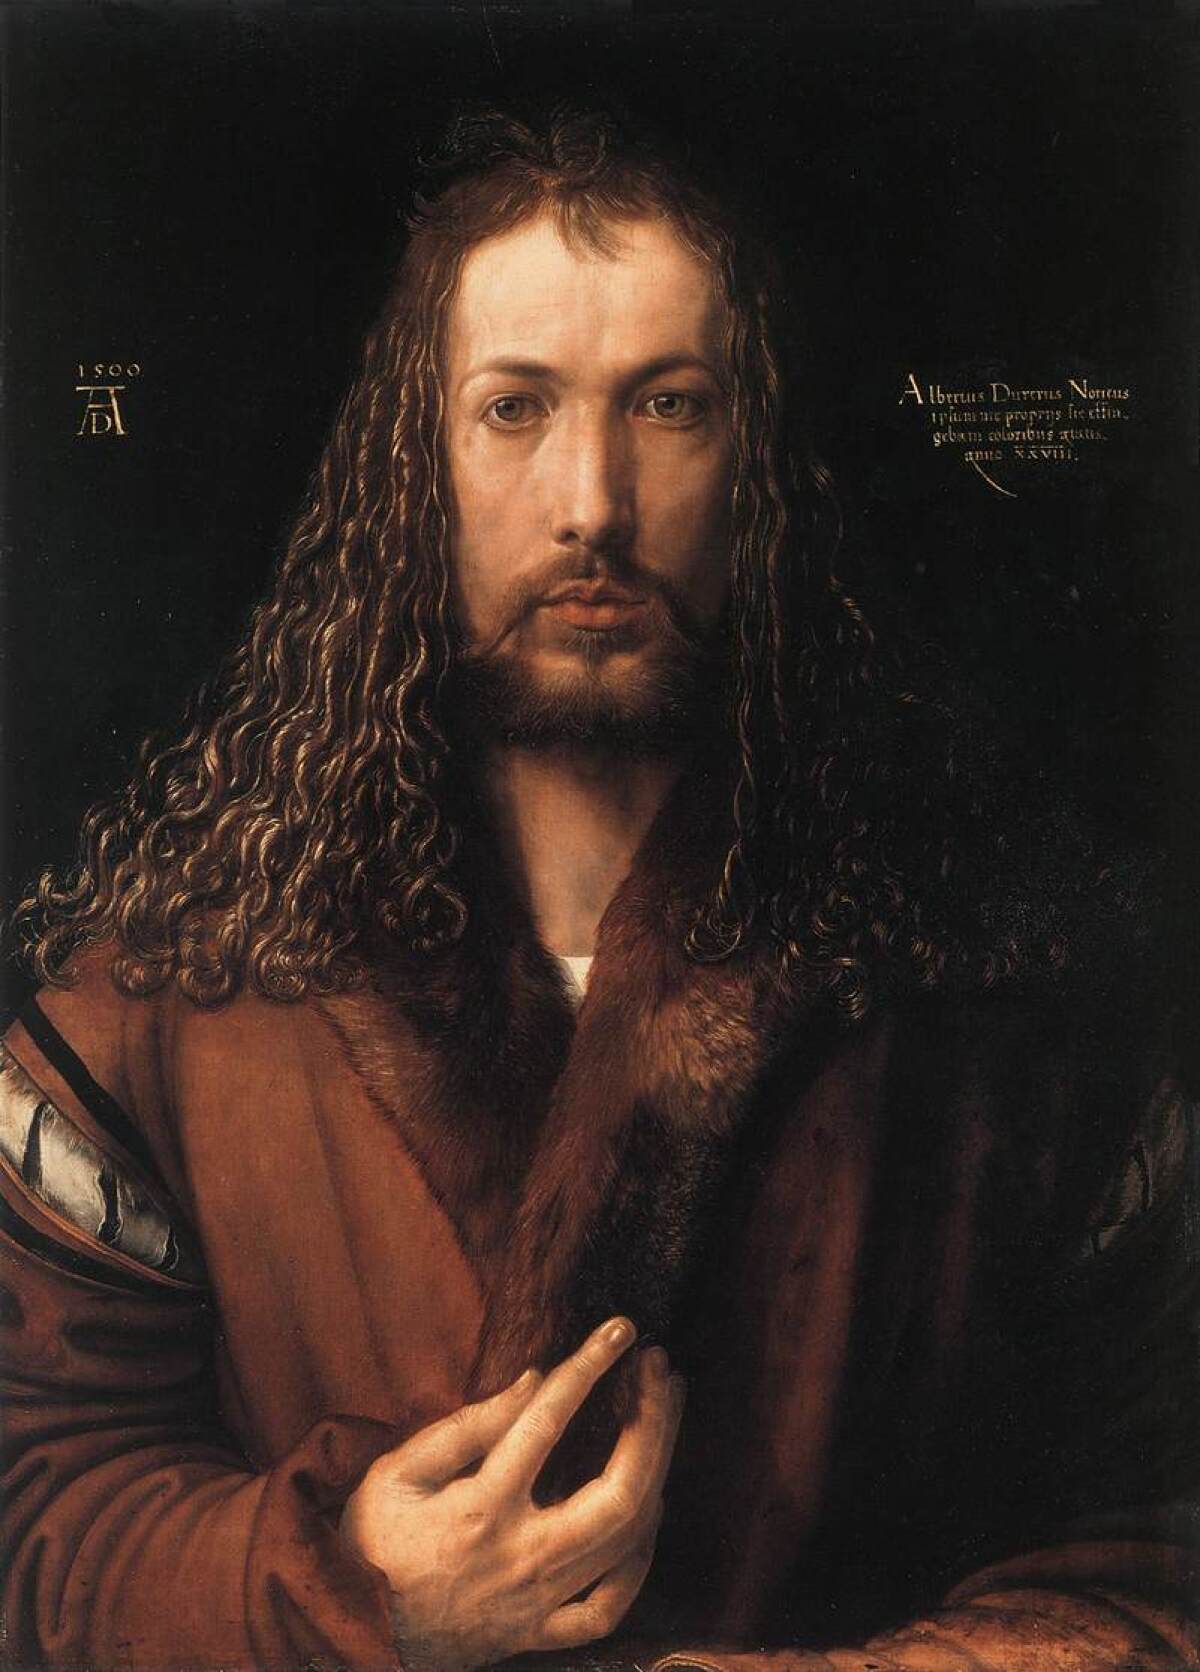 The Athenaeum Music & Arts Library continues its art history lecture series on Albrecht Dürer online Tuesday, Feb. 2.